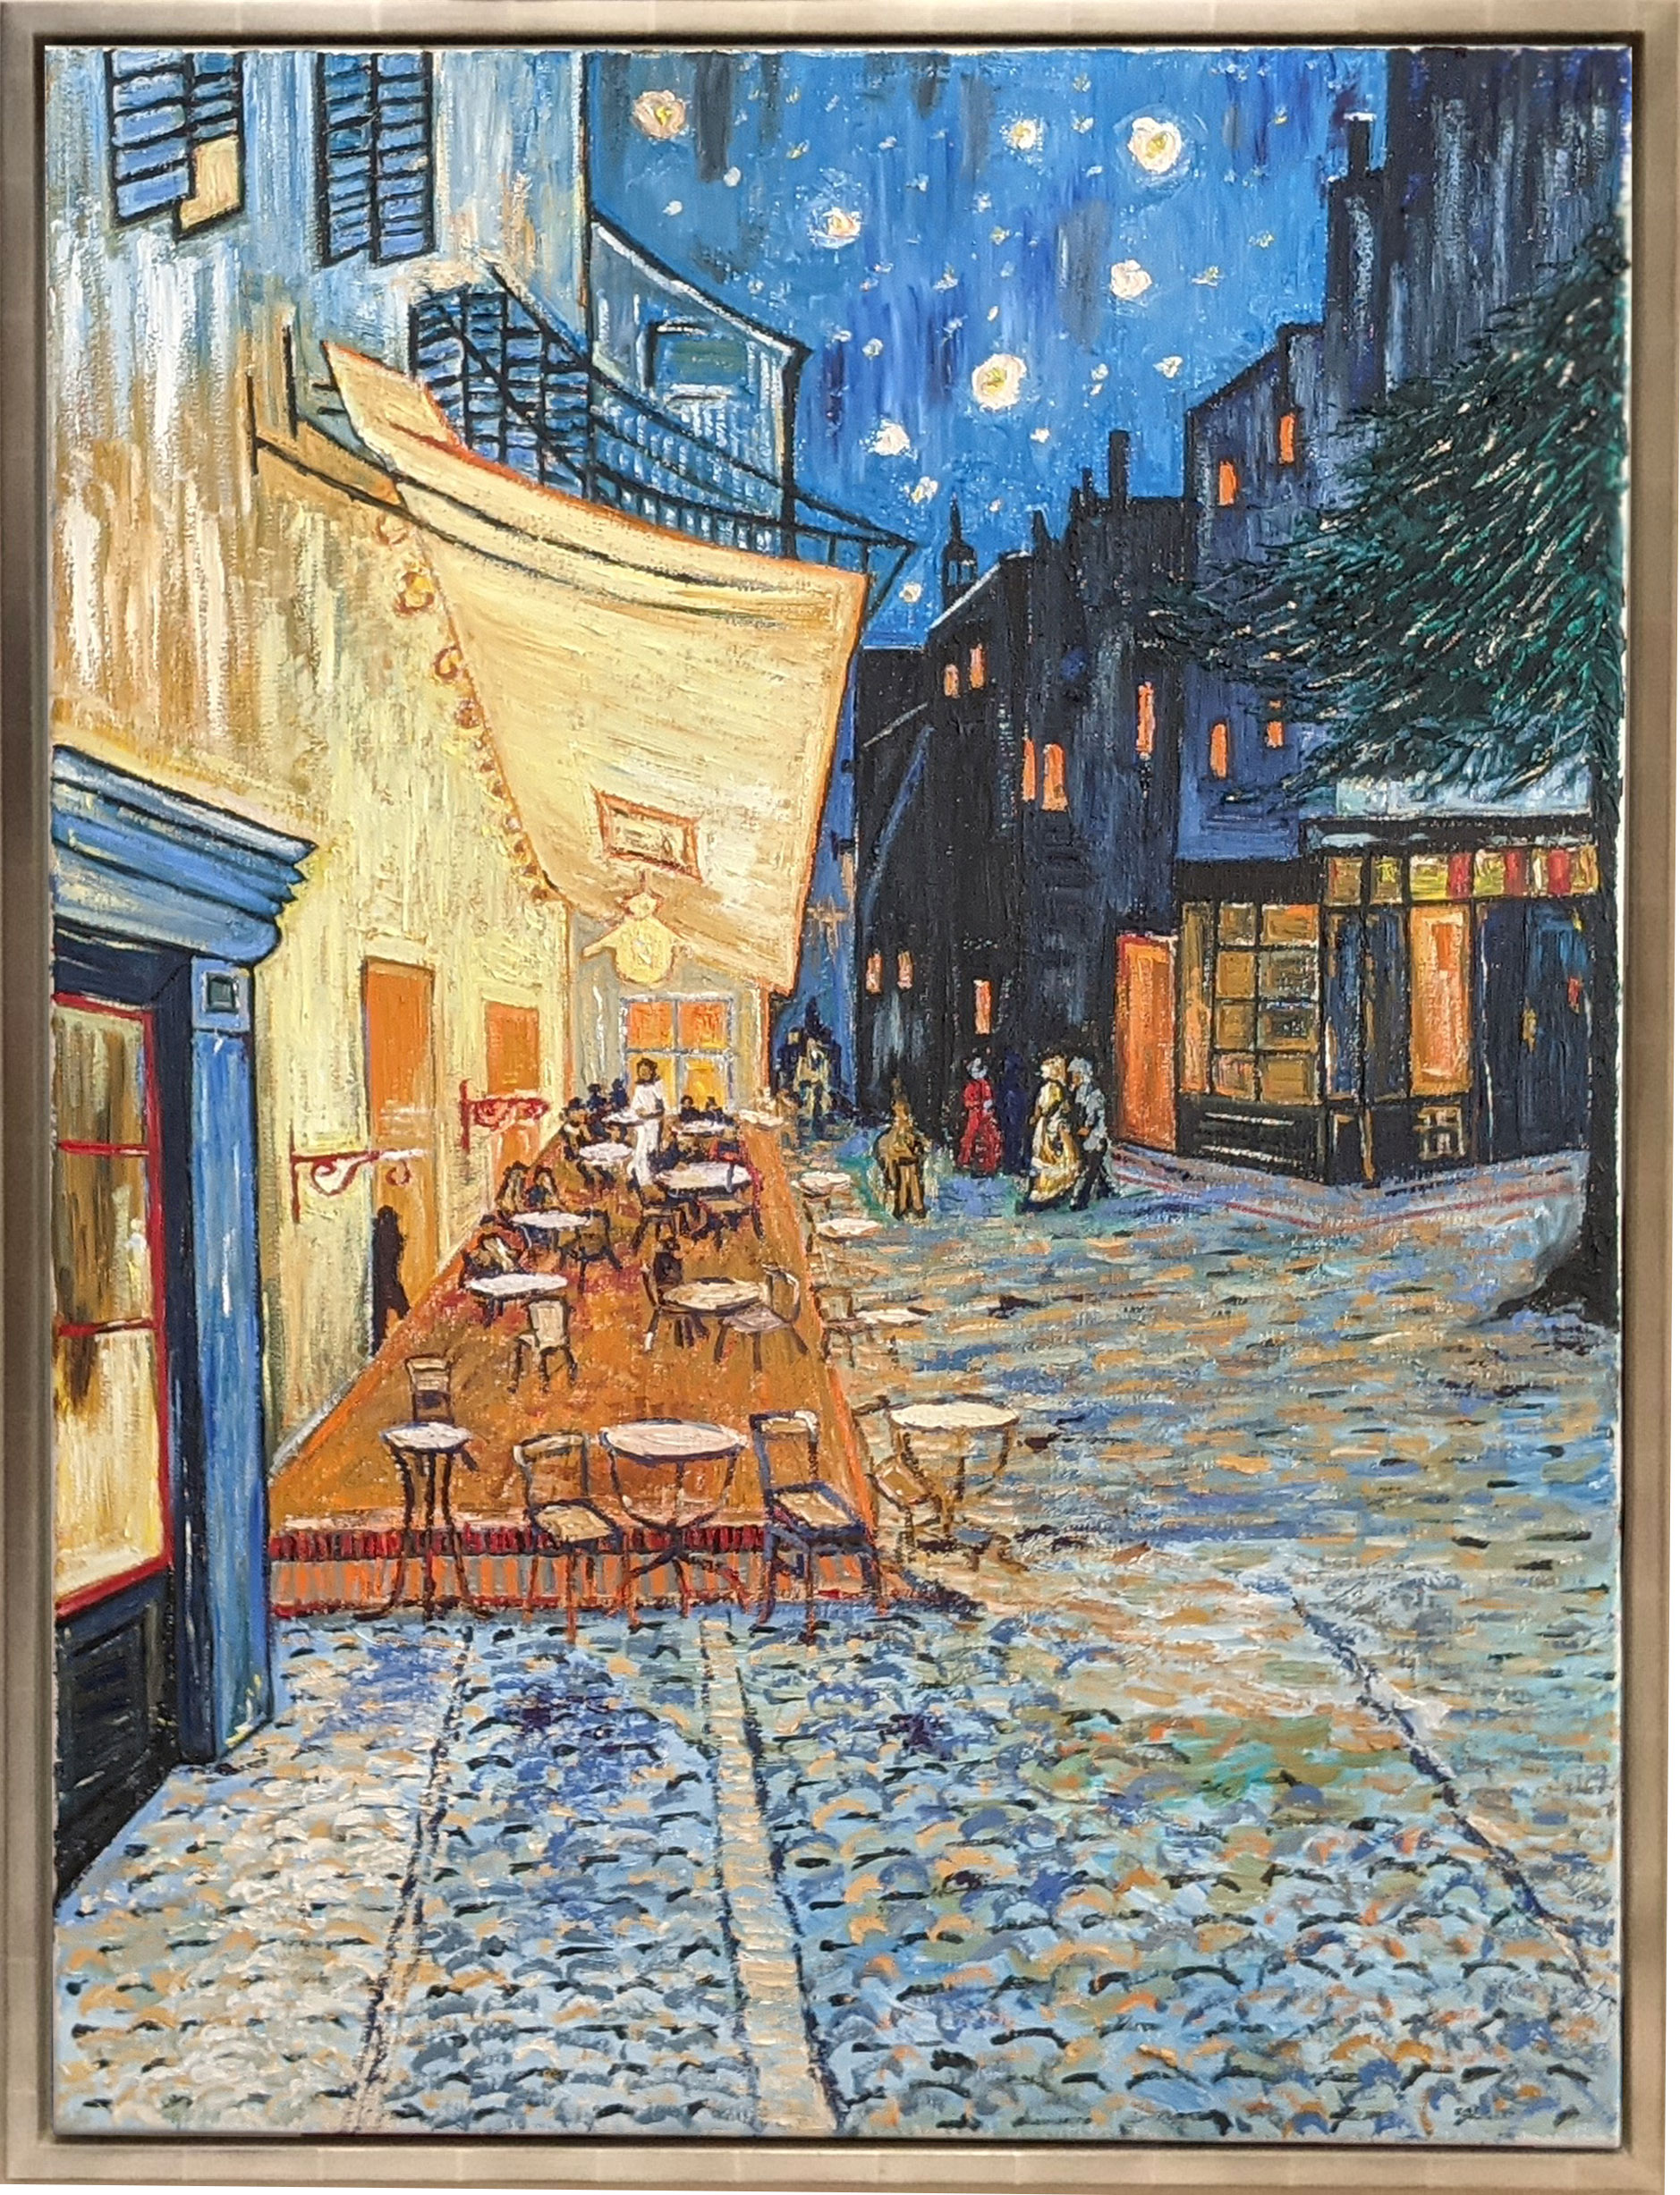 Café Terrace at Night reproduction by Fan Stanbrough